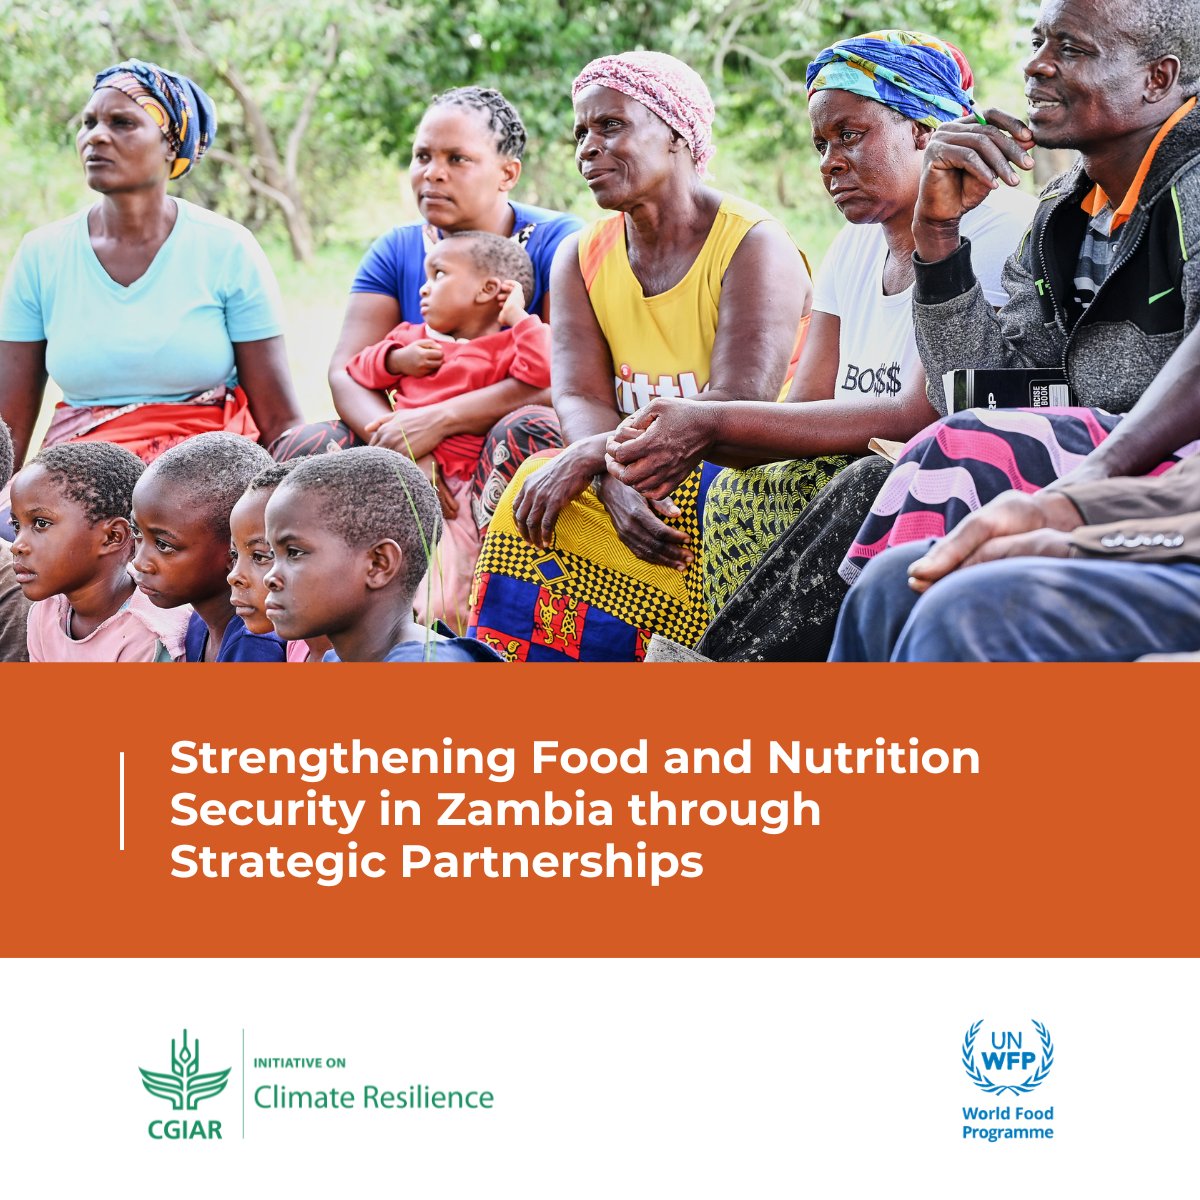 📢 🤝 @CGIAR and @WFP renew their commitment to strengthen food security through a new partnership between the #ClimateResilienceInitiative and @WFP_Zambia  to build climate resilience locally. 
🔎 on.cgiar.org/3U8kIin 
#OneCGIAR #foodsecurity #ClimateResilience @WFP_SAfrica